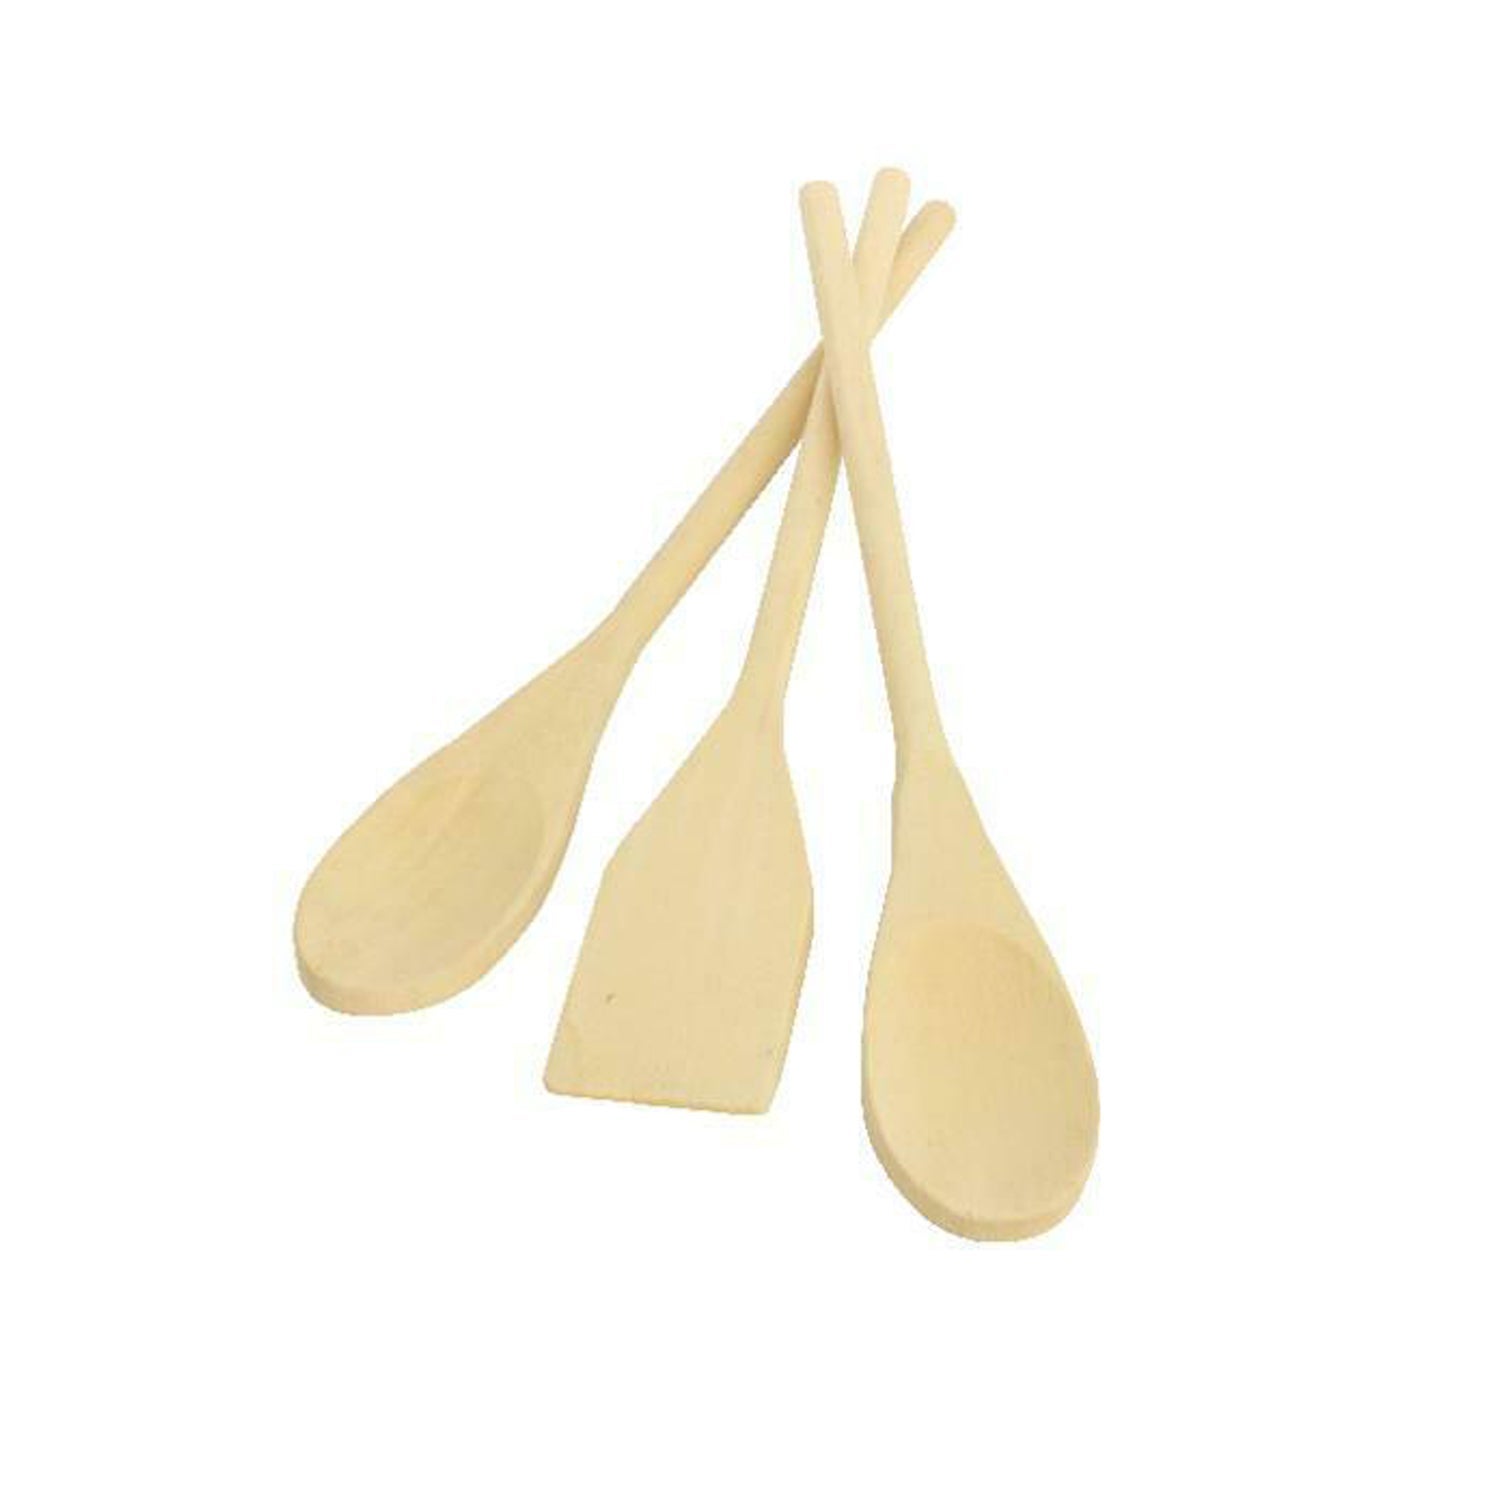 Long Handle Kitchen Baking Cooking Wooden Mixing Spoon